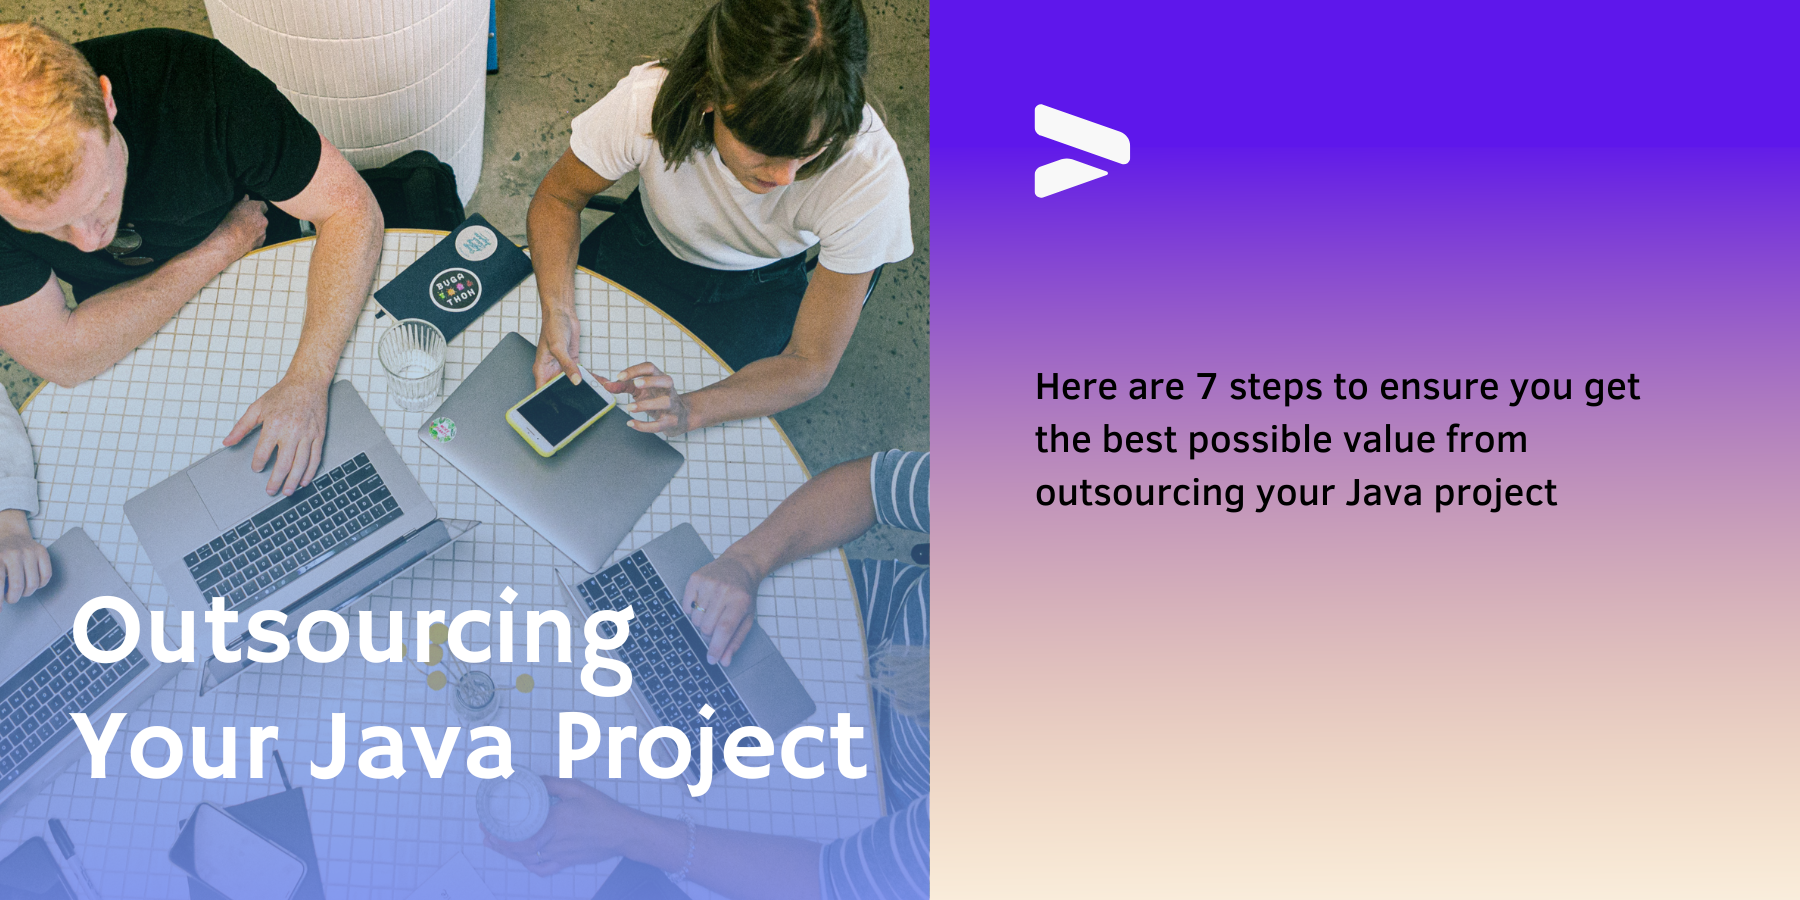 Outsourcing Your Java Project